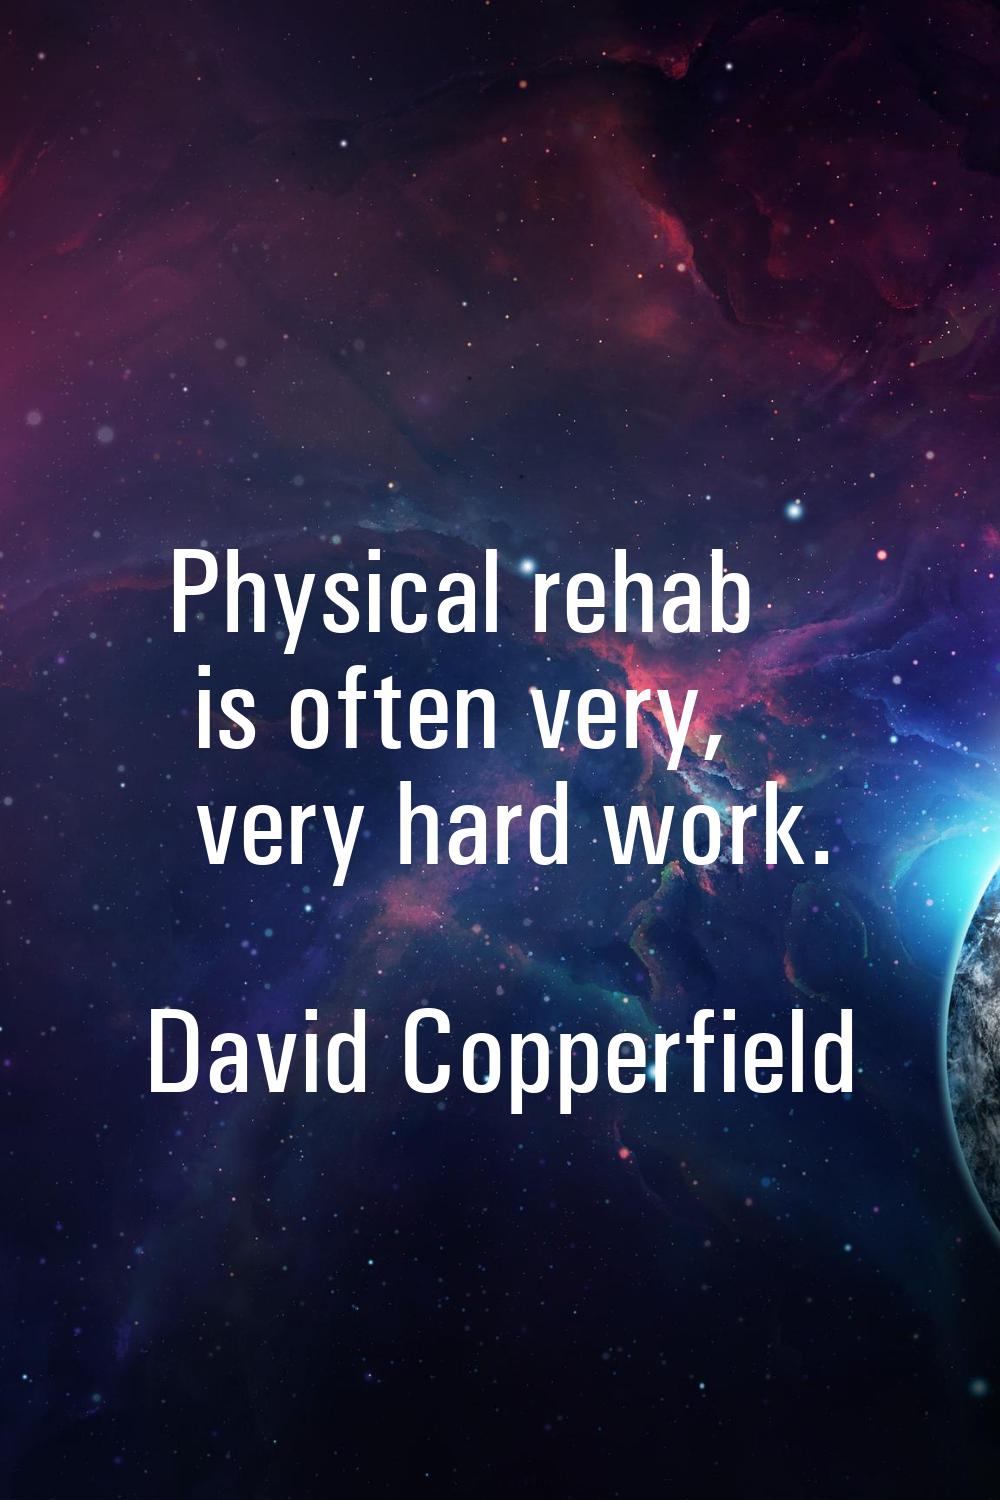 Physical rehab is often very, very hard work.